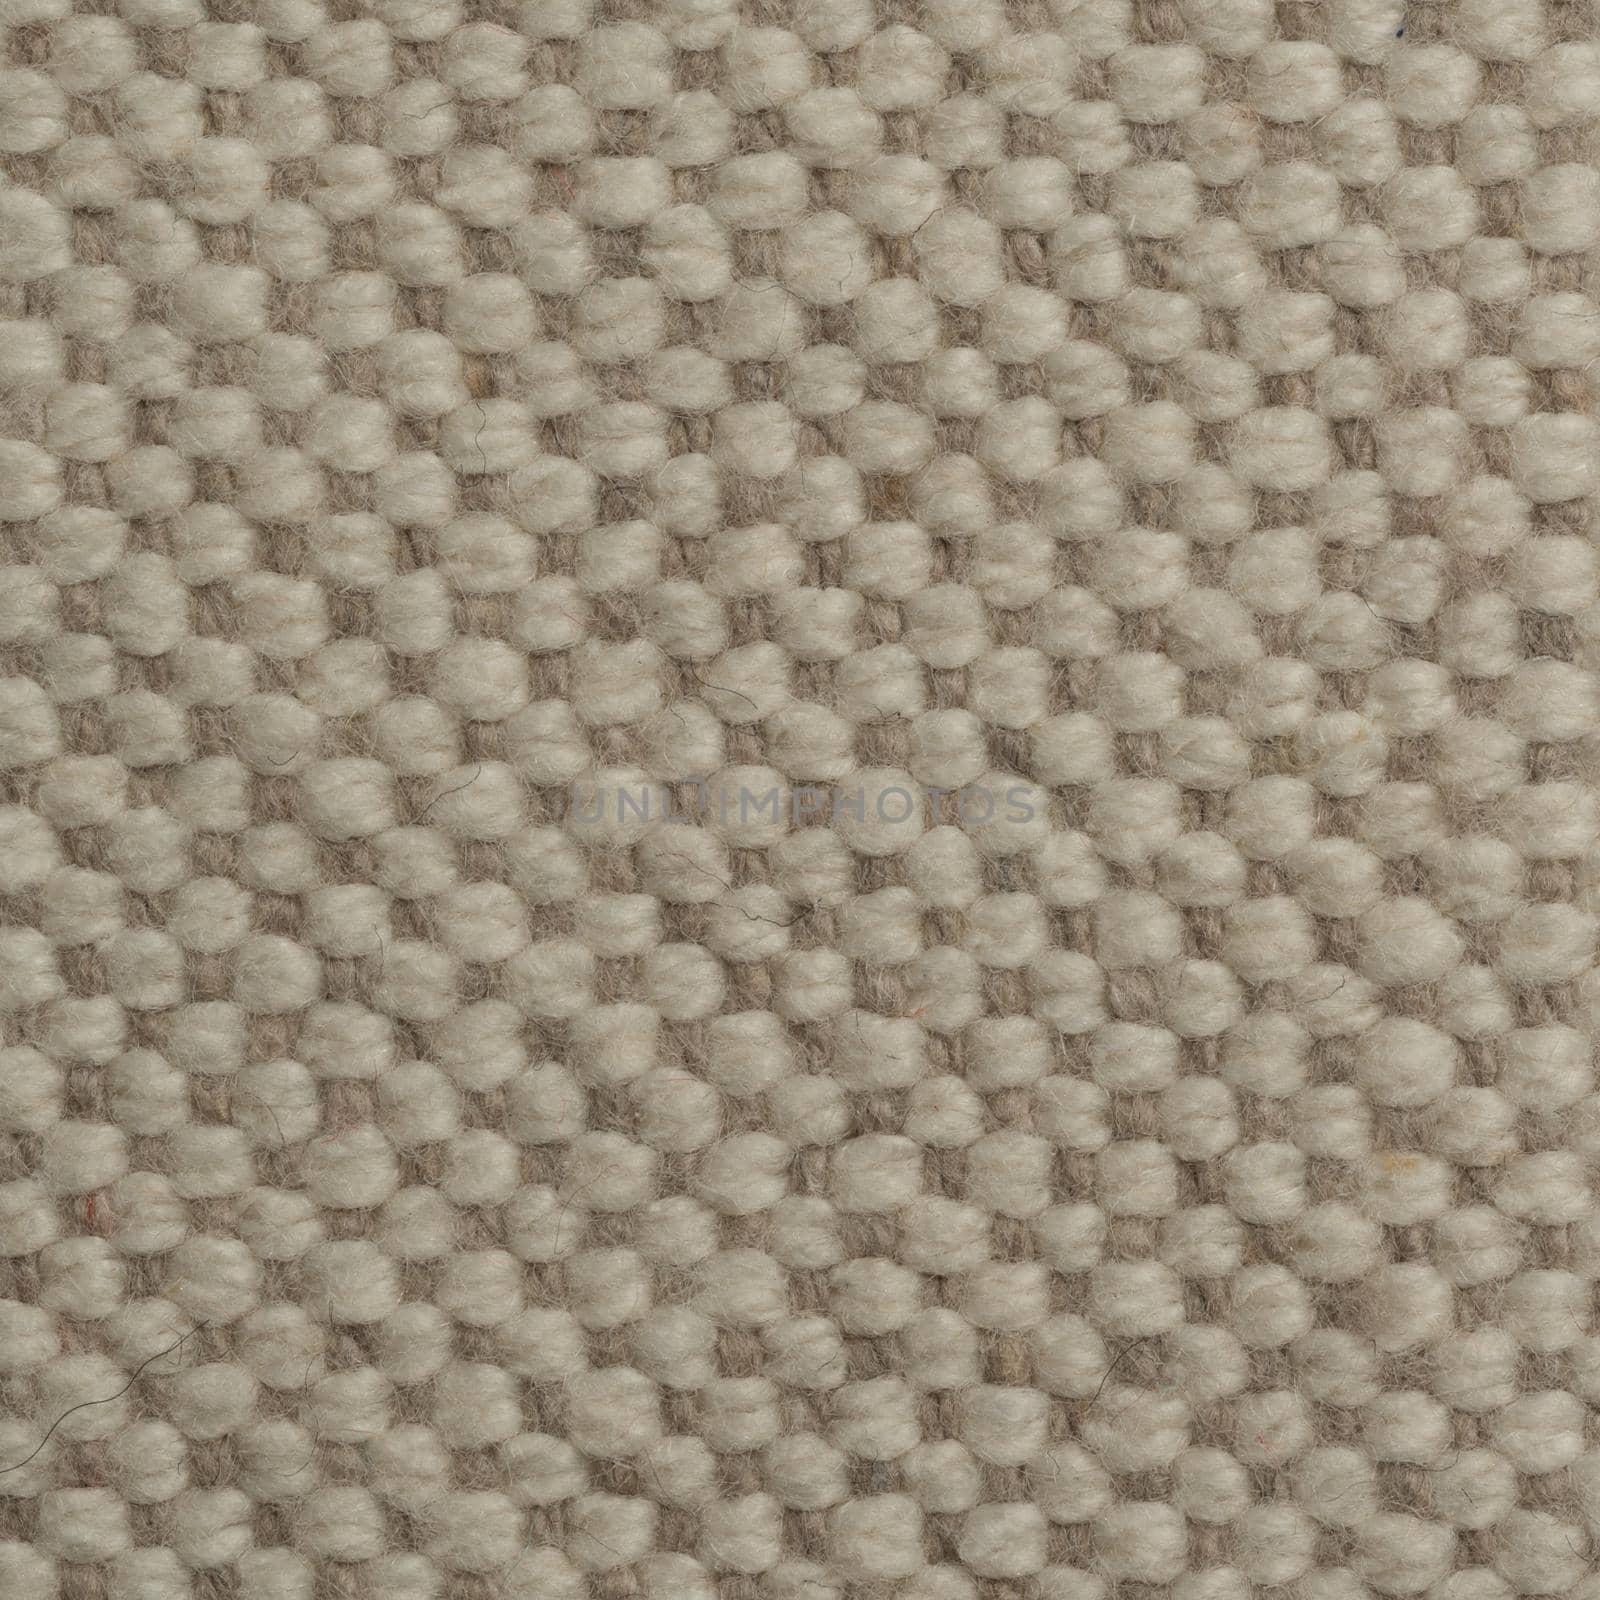 Fabric texture closeup macro shot for the background